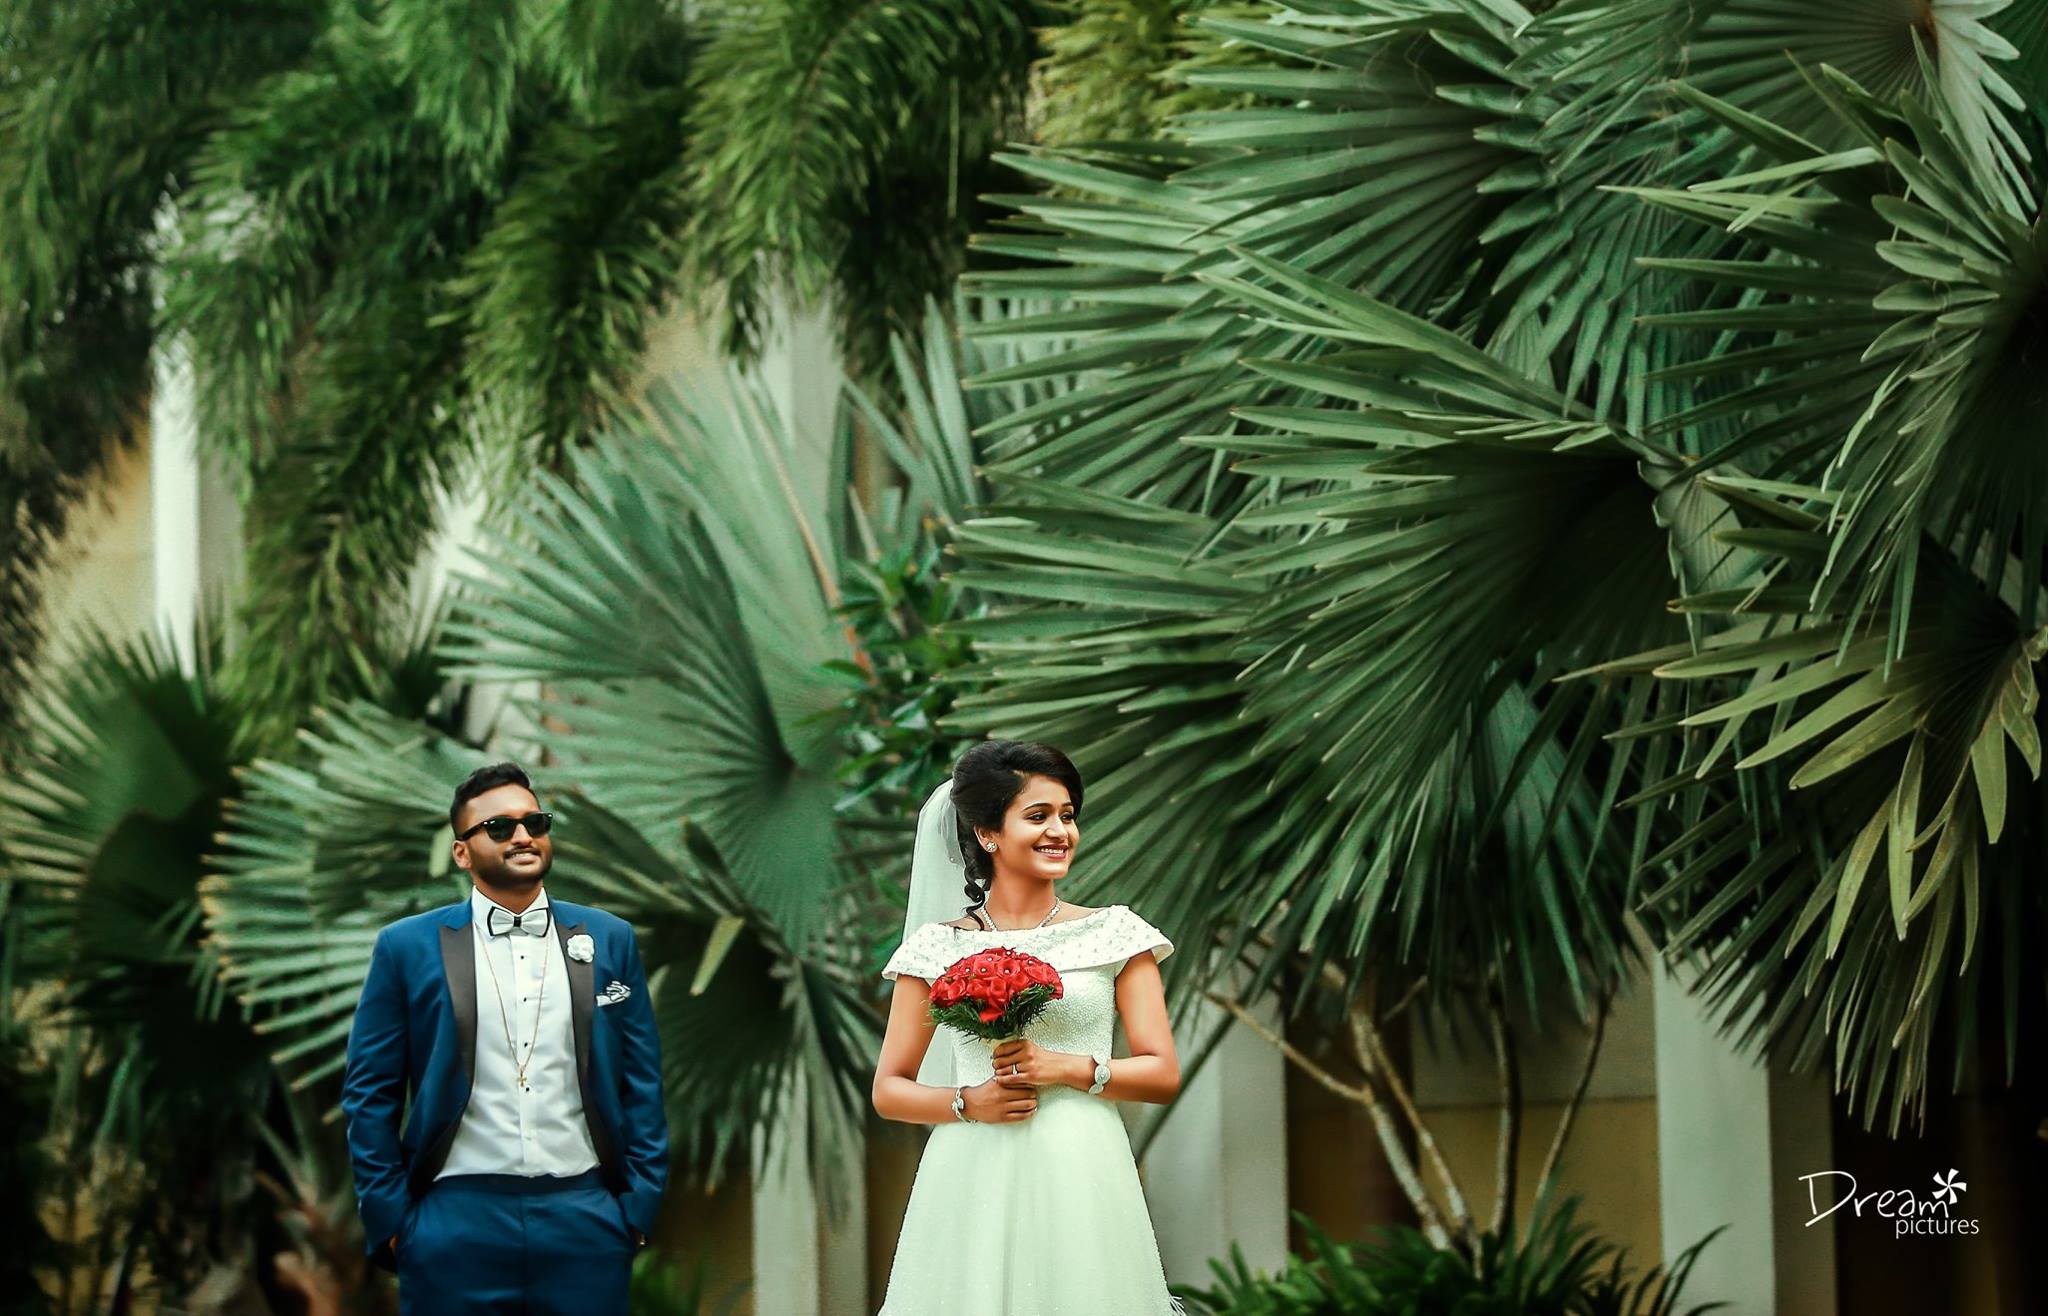 Dreampictures Wedding | Wedding Photography In Ker